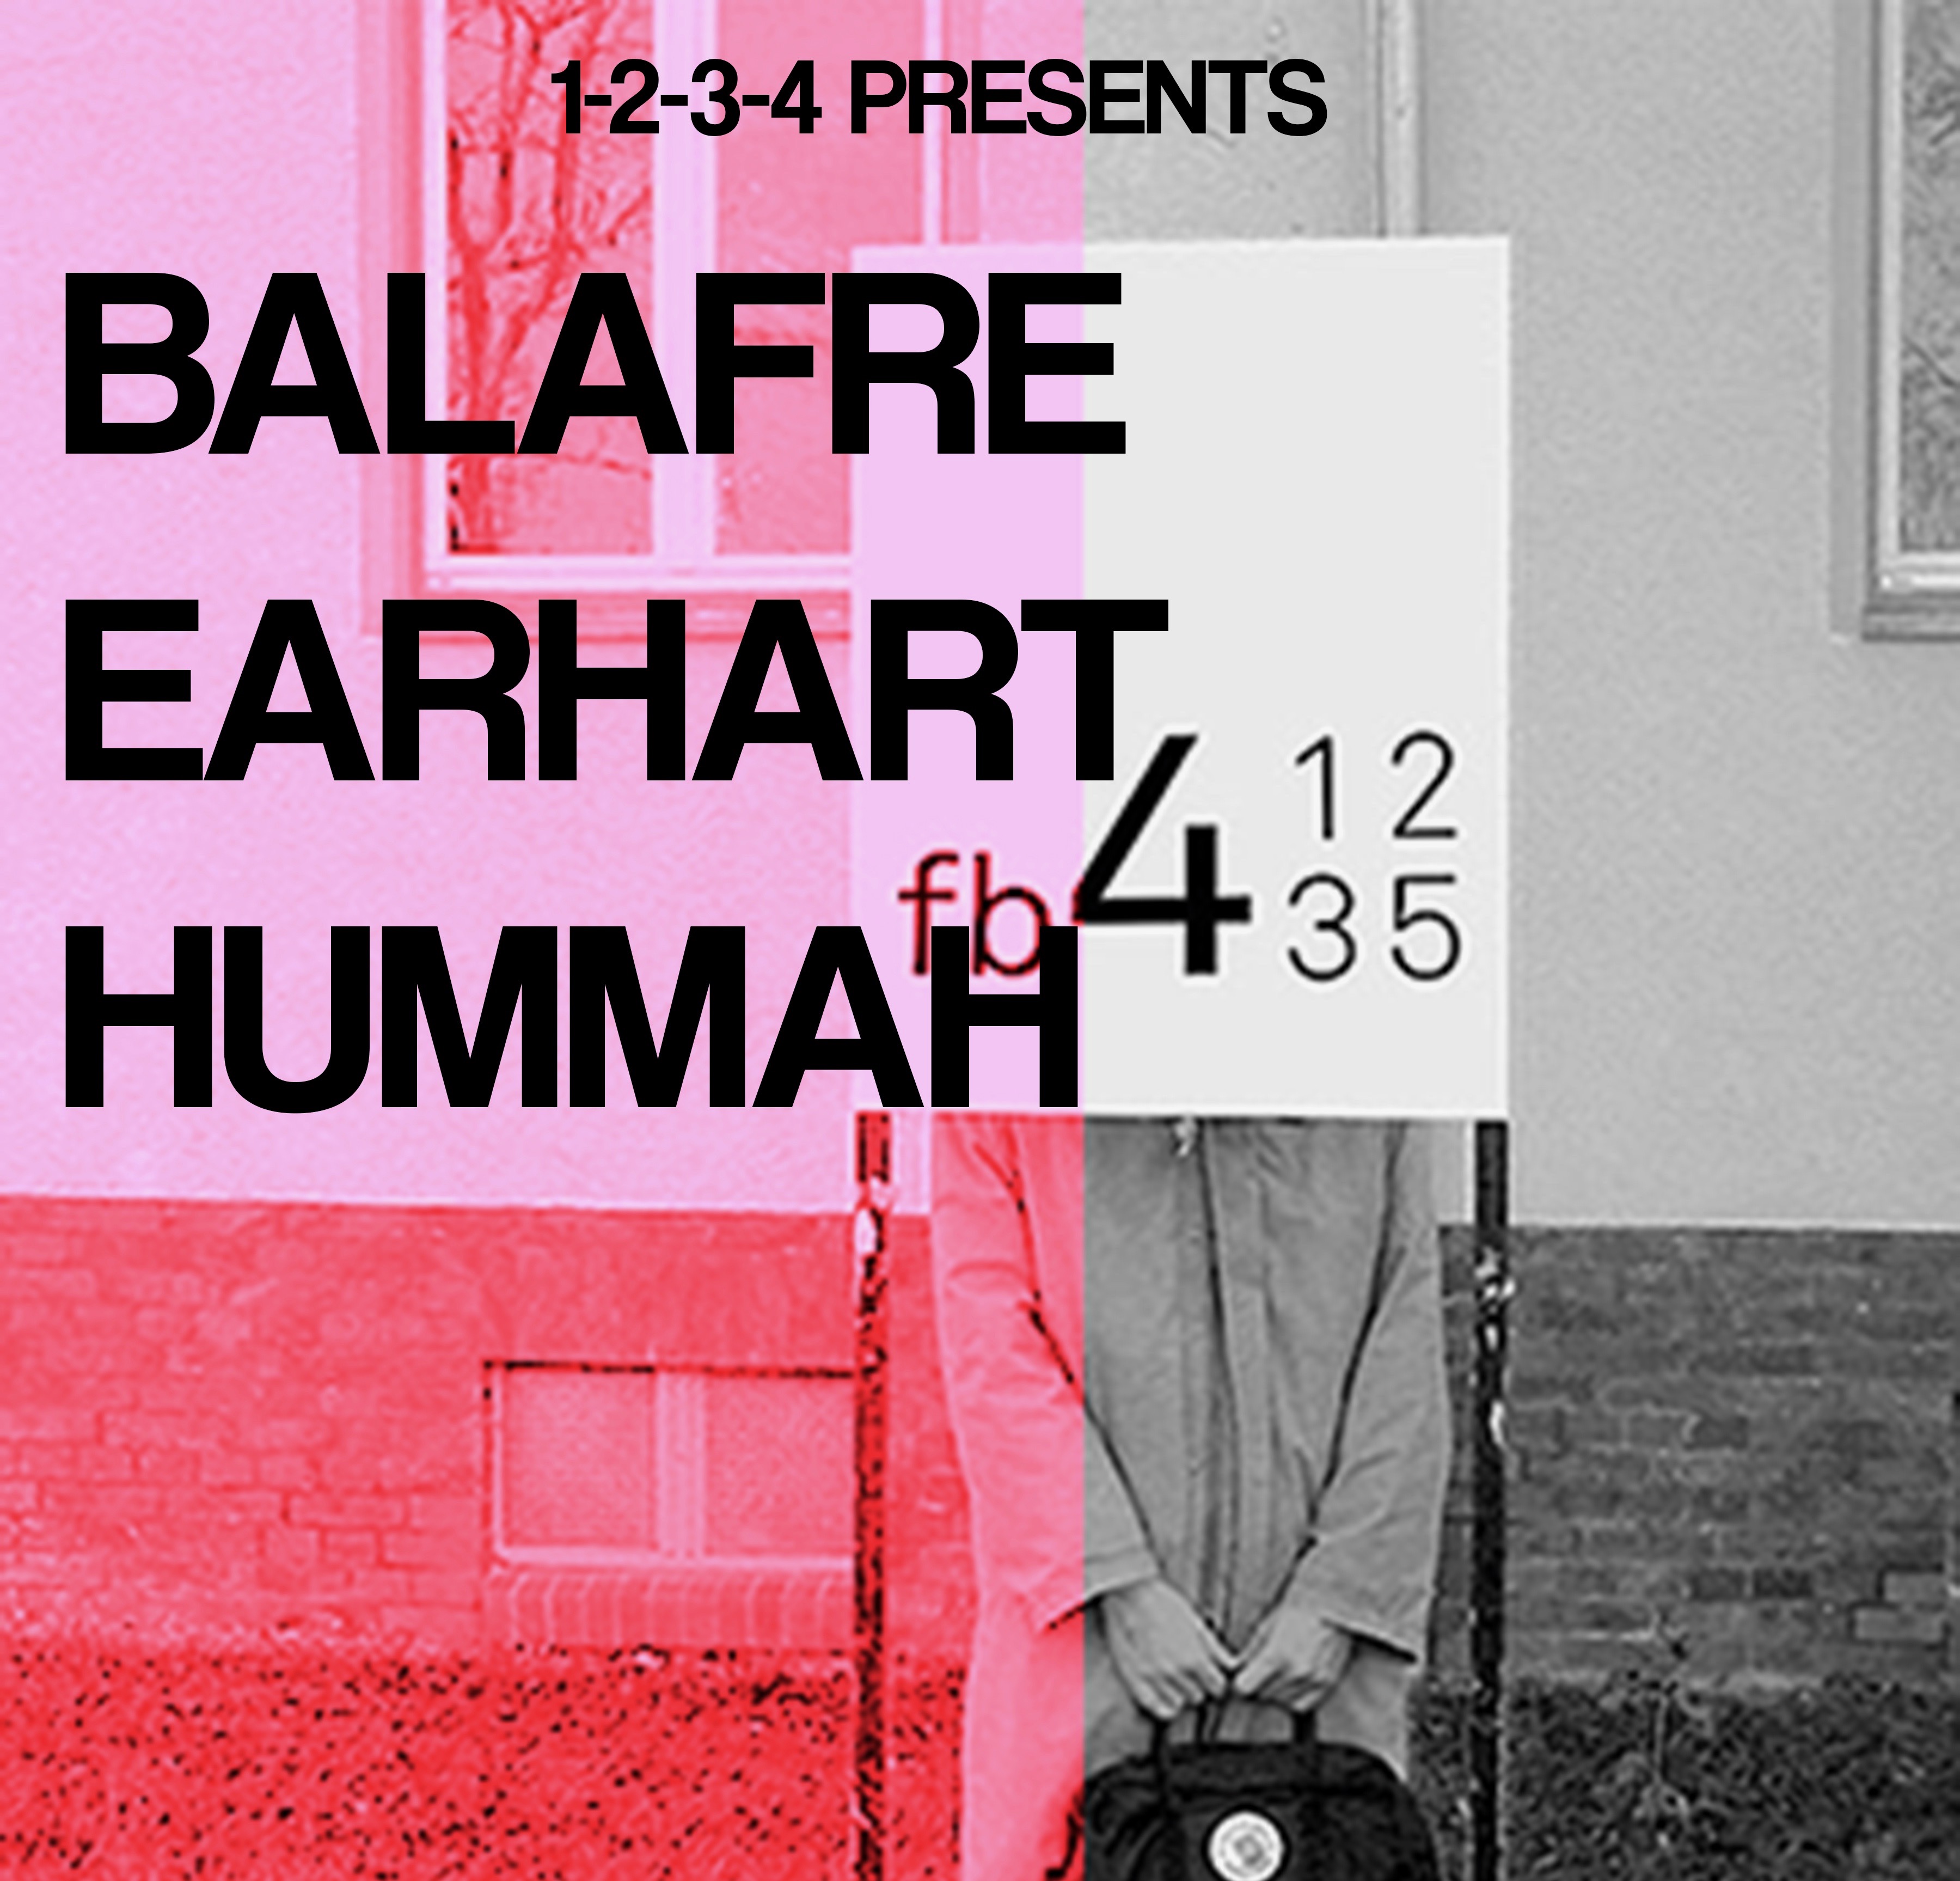 1234 Presents: Balafre, Earhart, Hummah at The Victoria promotional image